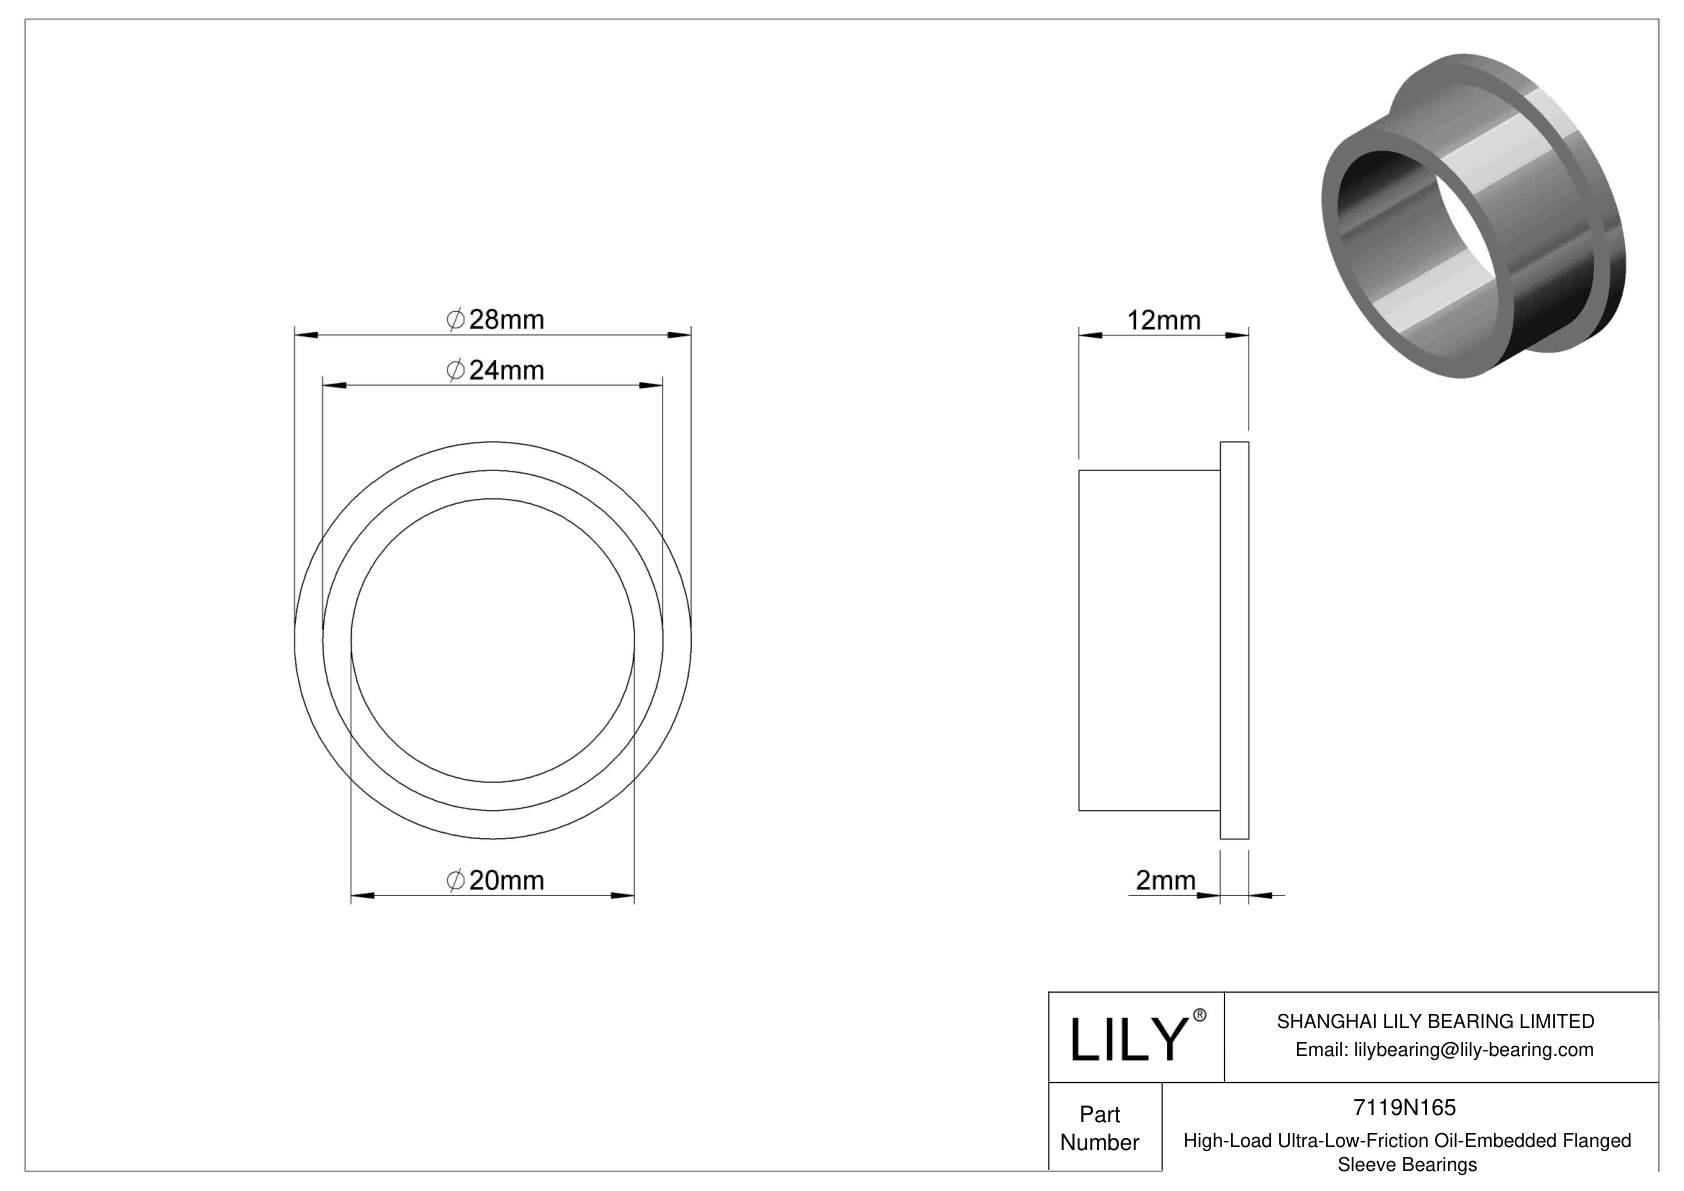 HBBJNBGF High-Load Ultra-Low-Friction Oil-Embedded Flanged Sleeve Bearings cad drawing